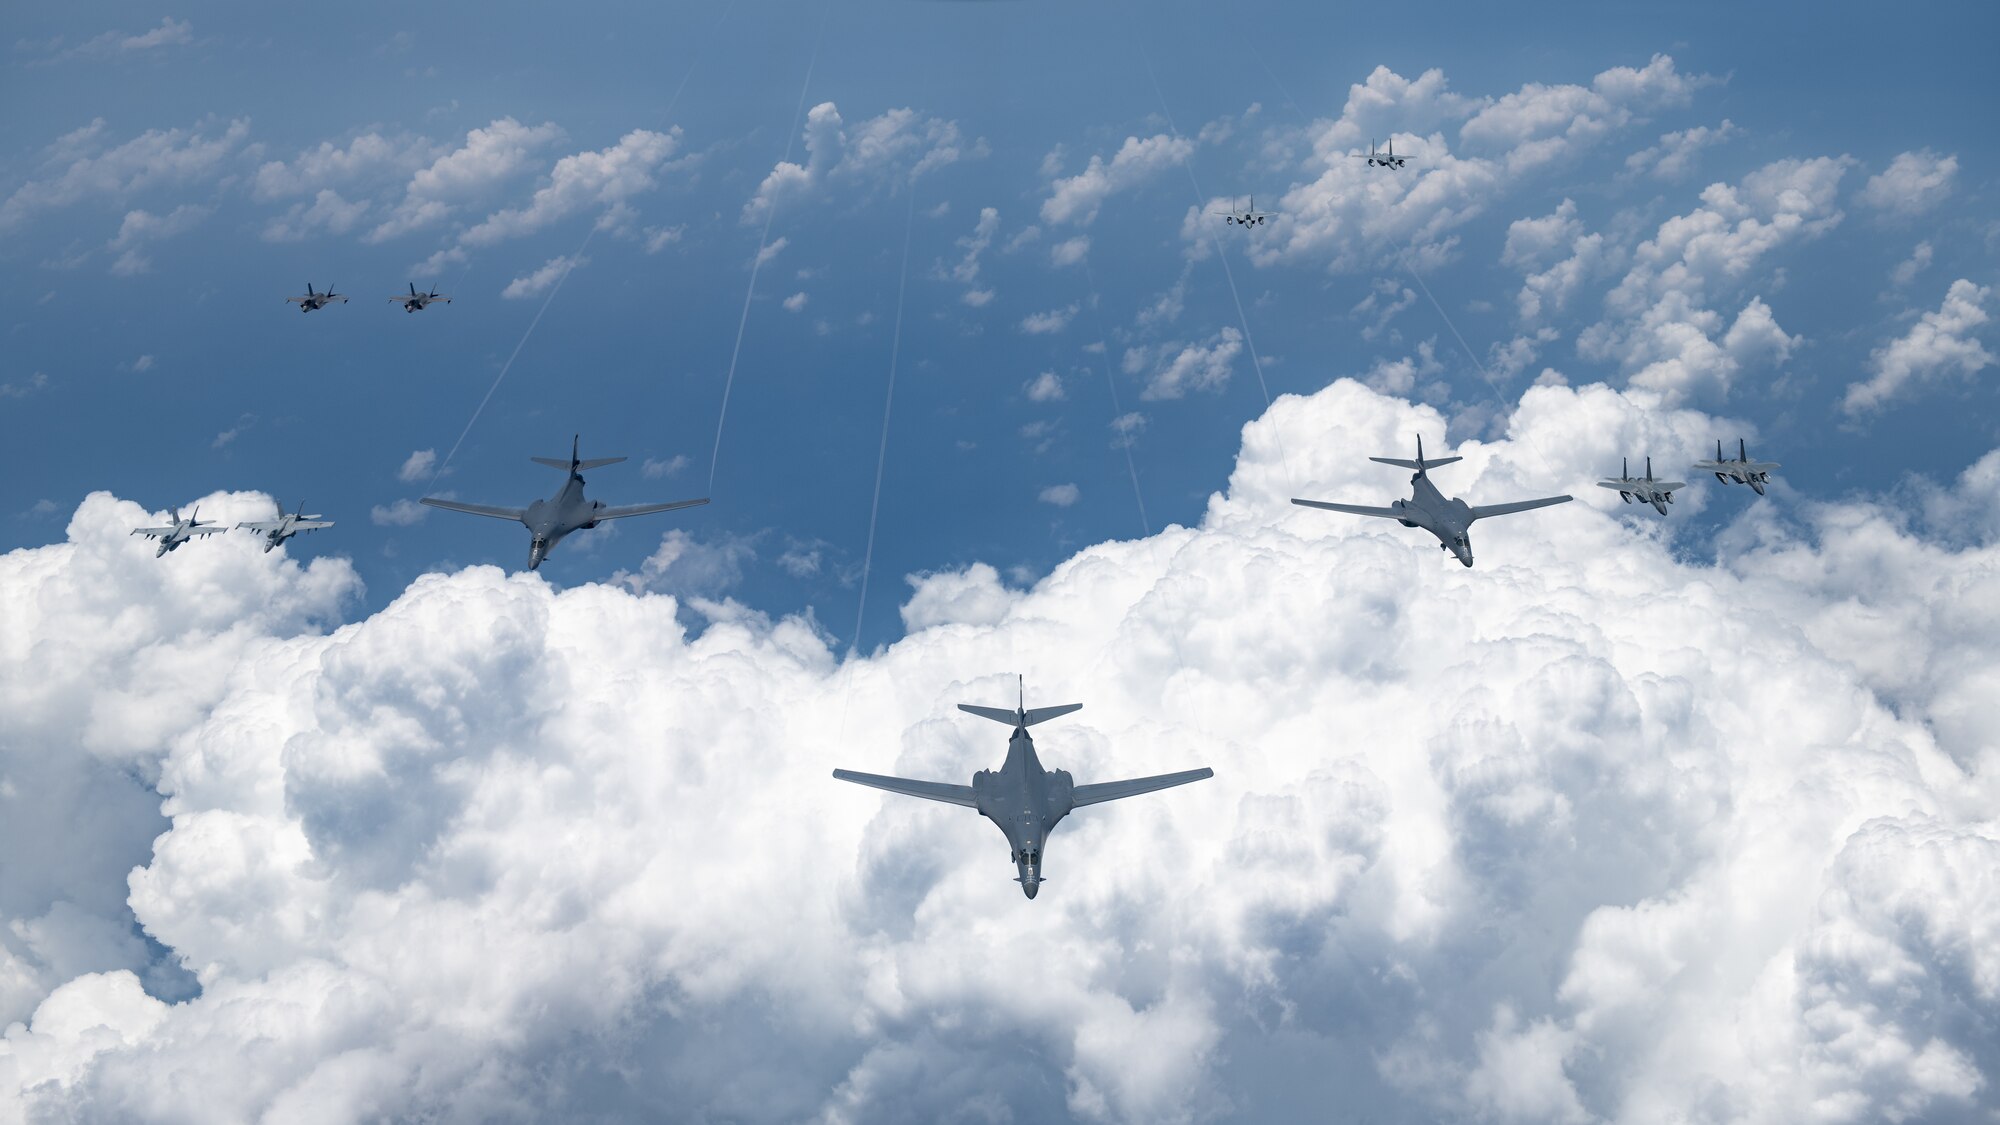 U.S. Air Force, Navy, Marine Corps and Japan Air Self Defense Force aircraft conduct a large-scale joint and bilateral integration training exercise Aug. 18, 2020. Four B-1B Lancers, two B-2 Spirit Stealth Bombers, and four F-15C Eagles conducted Bomber Task Force missions simultaneously within the Indo-Pacific region over the course of 24 hours. Pacific Air Forces routinely conducts BTF operations to show the United States’ commitment to allies and partners in the Indo-Pacific area of responsibility. (U.S. Air Force photo by Staff Sgt. Peter Reft)